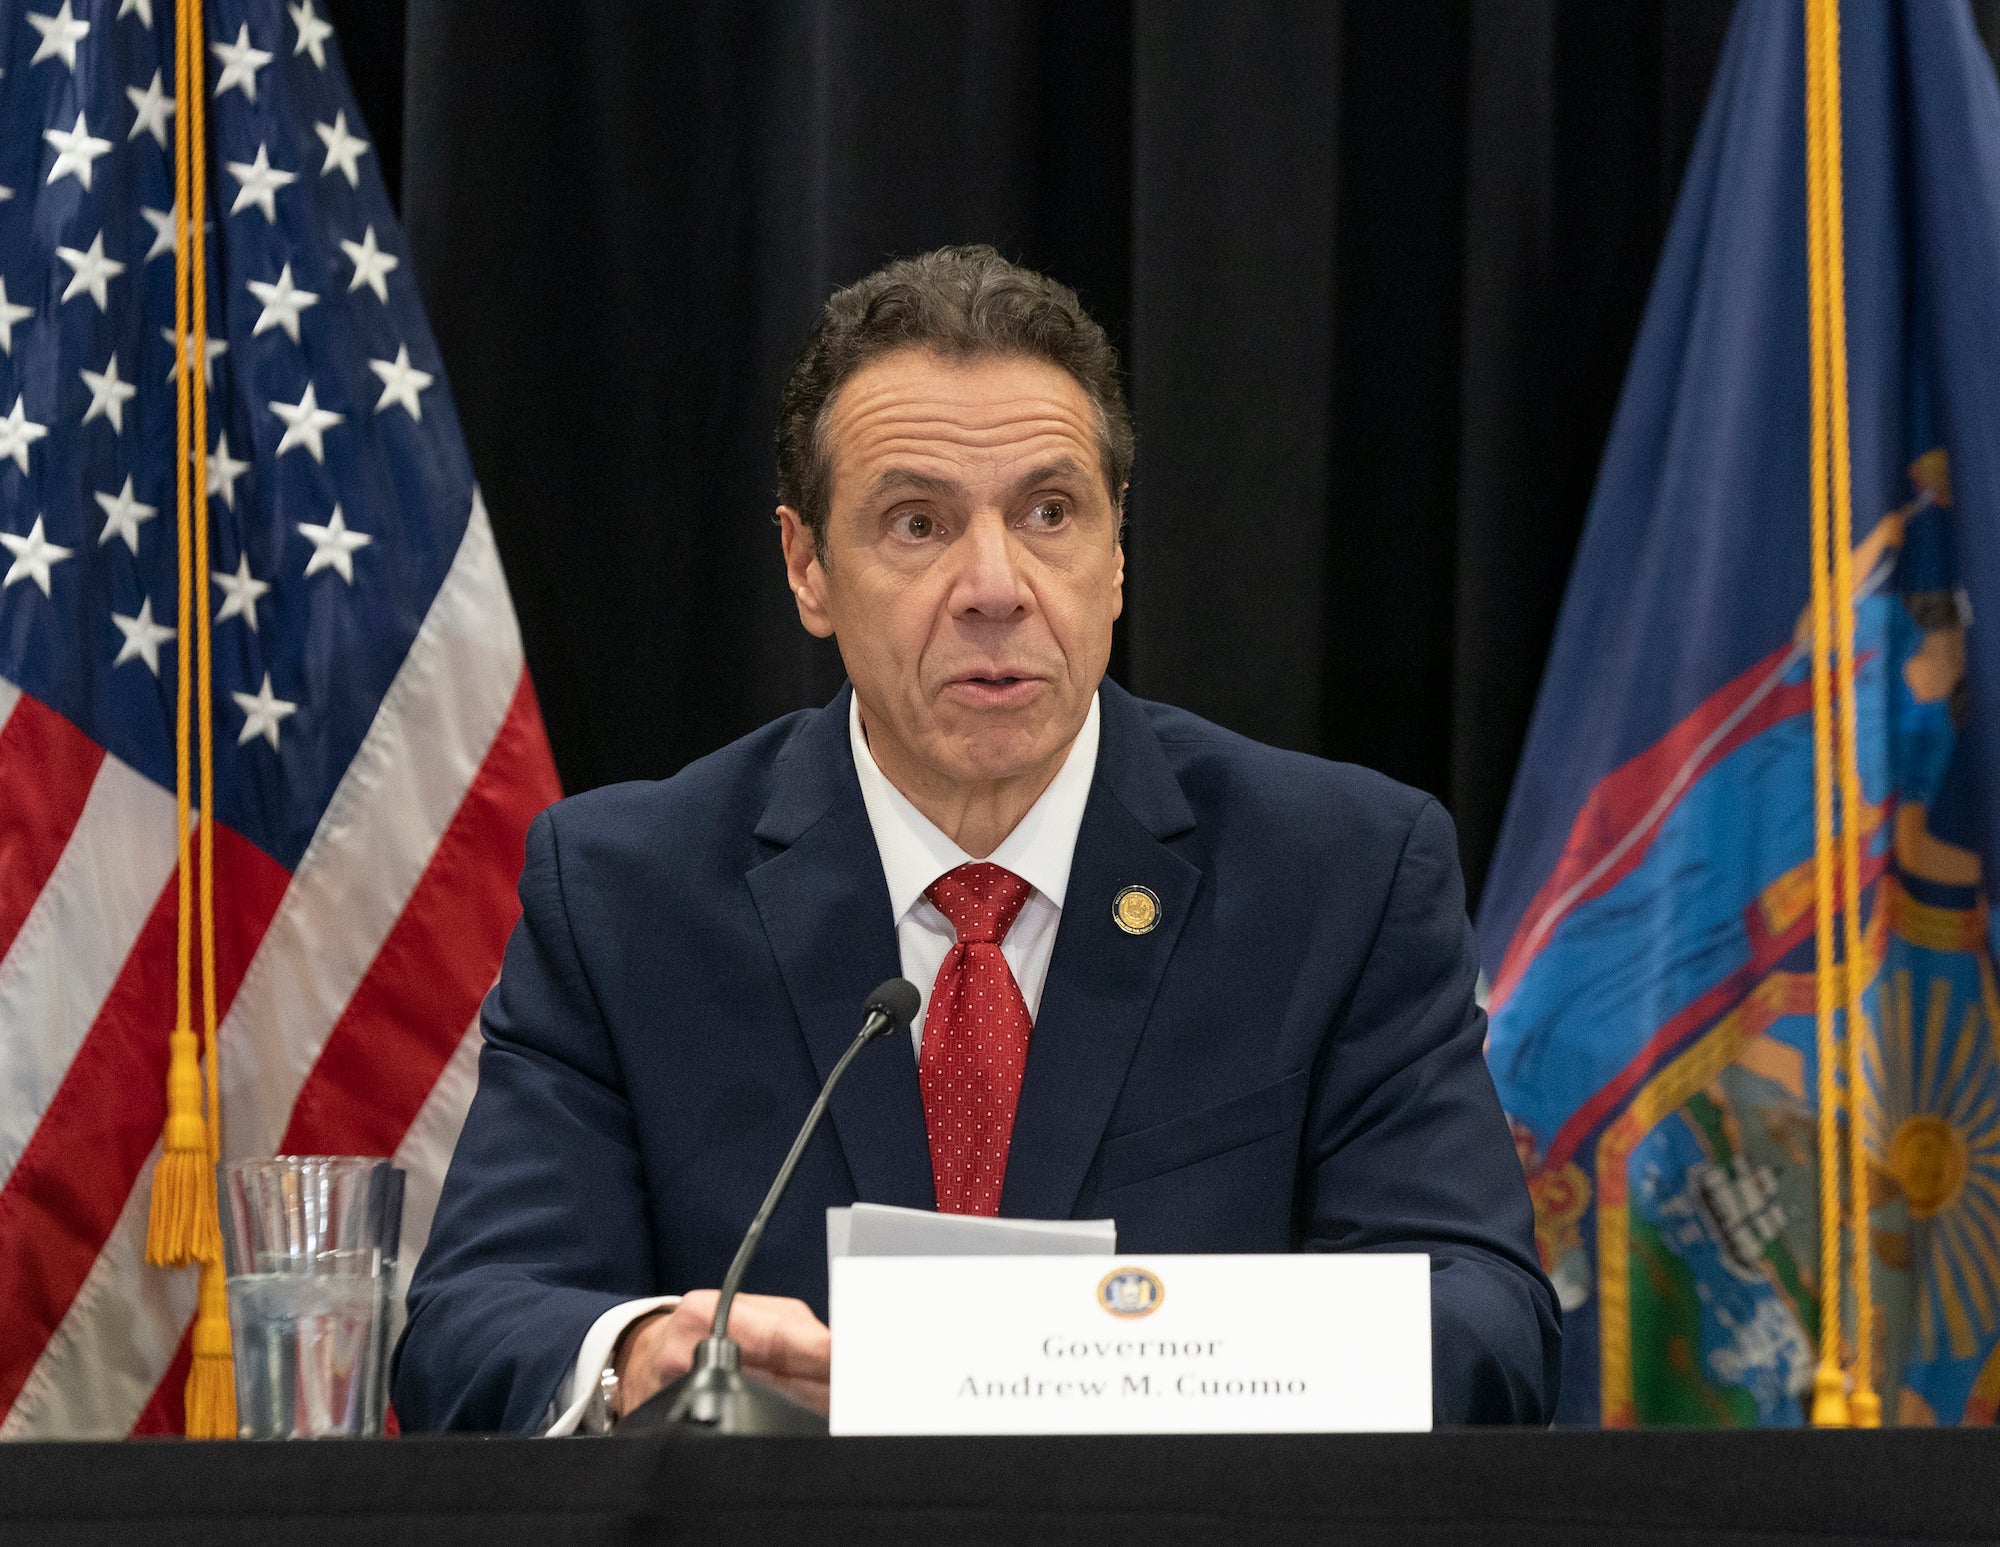 New York Governor Declares State Of Emergency As Coronavirus Cases Rise To 76